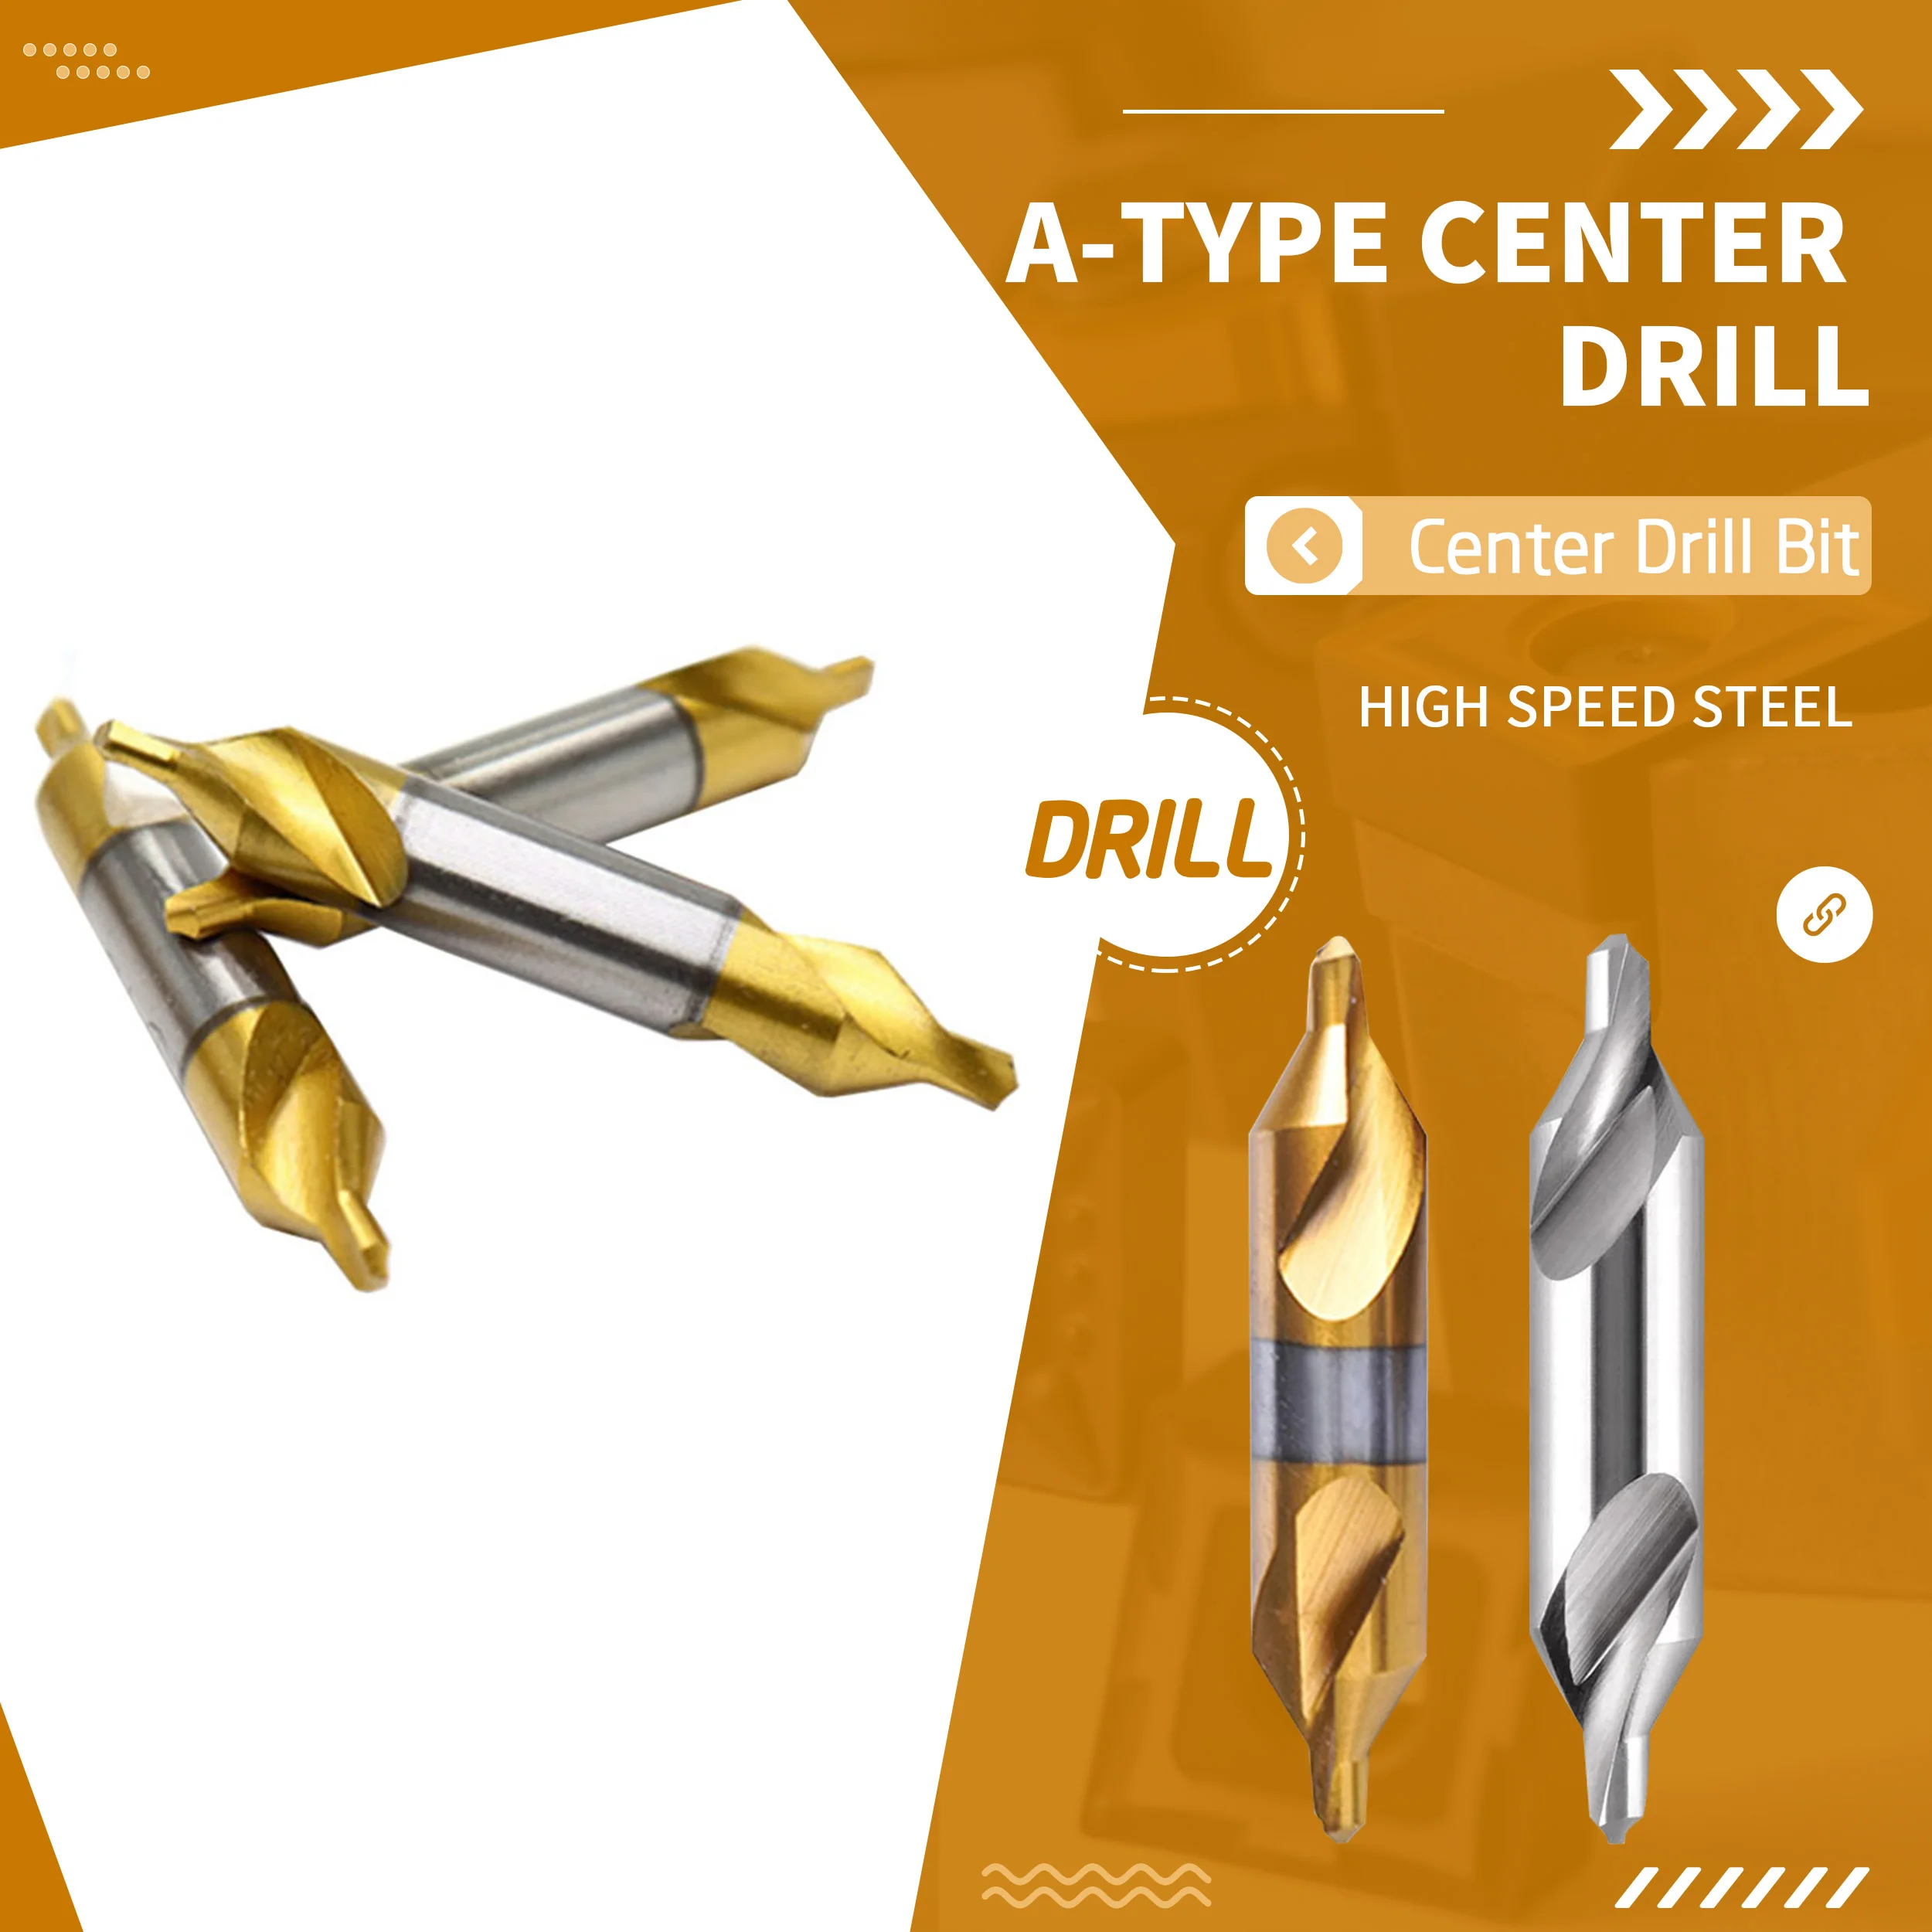 

A-Type Center Drill Centering Drill Spiral Flute Stainless Steel Centering Drill Titan-Plated Cobalt-Containing High-Speed Steel